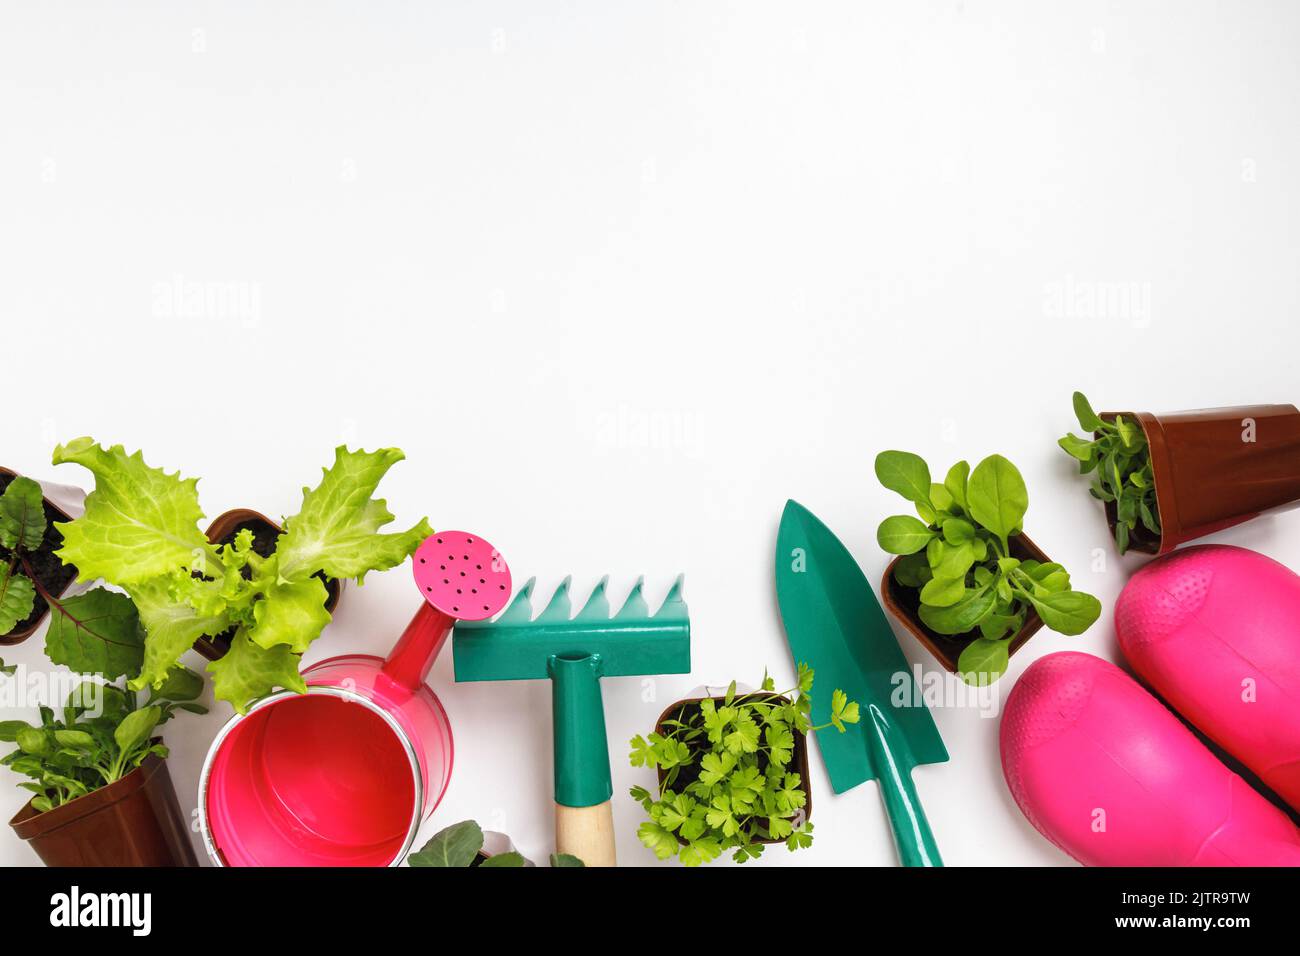 Work in the garden. Tools and potted plants on the table. Stock Photo